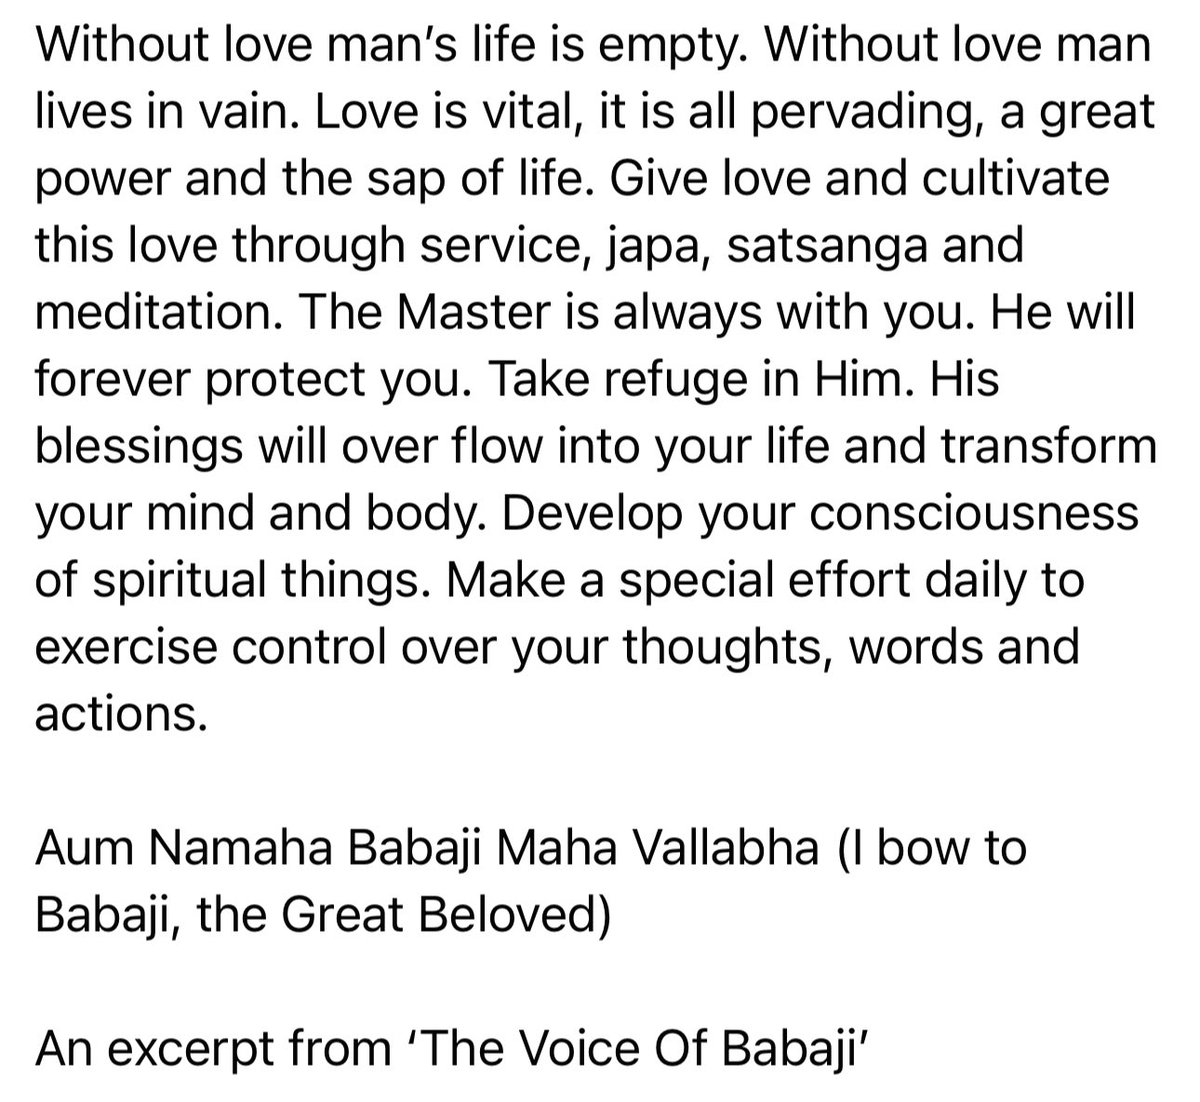 Take refuge in the Master. His blessings will over flow into your life and transform your mind and body. Develop your consciousness of spiritual things. Make a special effort daily to exercise control over your thoughts, words and actions. Aum Namaha Babaji Maha Vallabha!